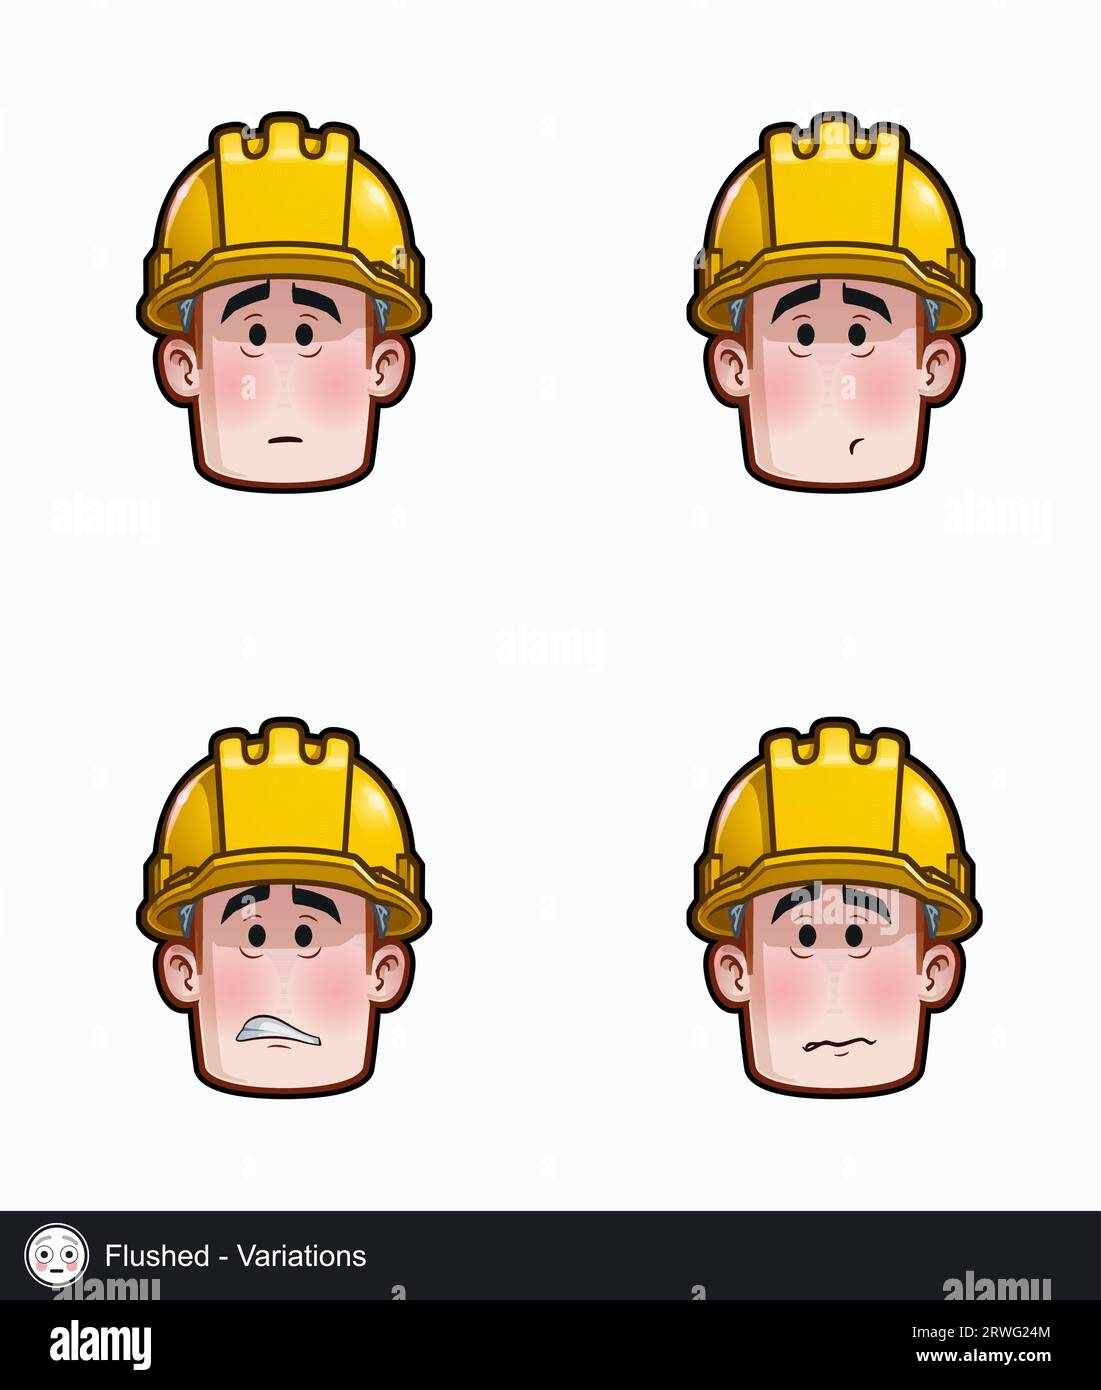 Icon set of a construction worker face with Flushed emotional expression variations. All elements neatly on well described layers and groups. Stock Vector